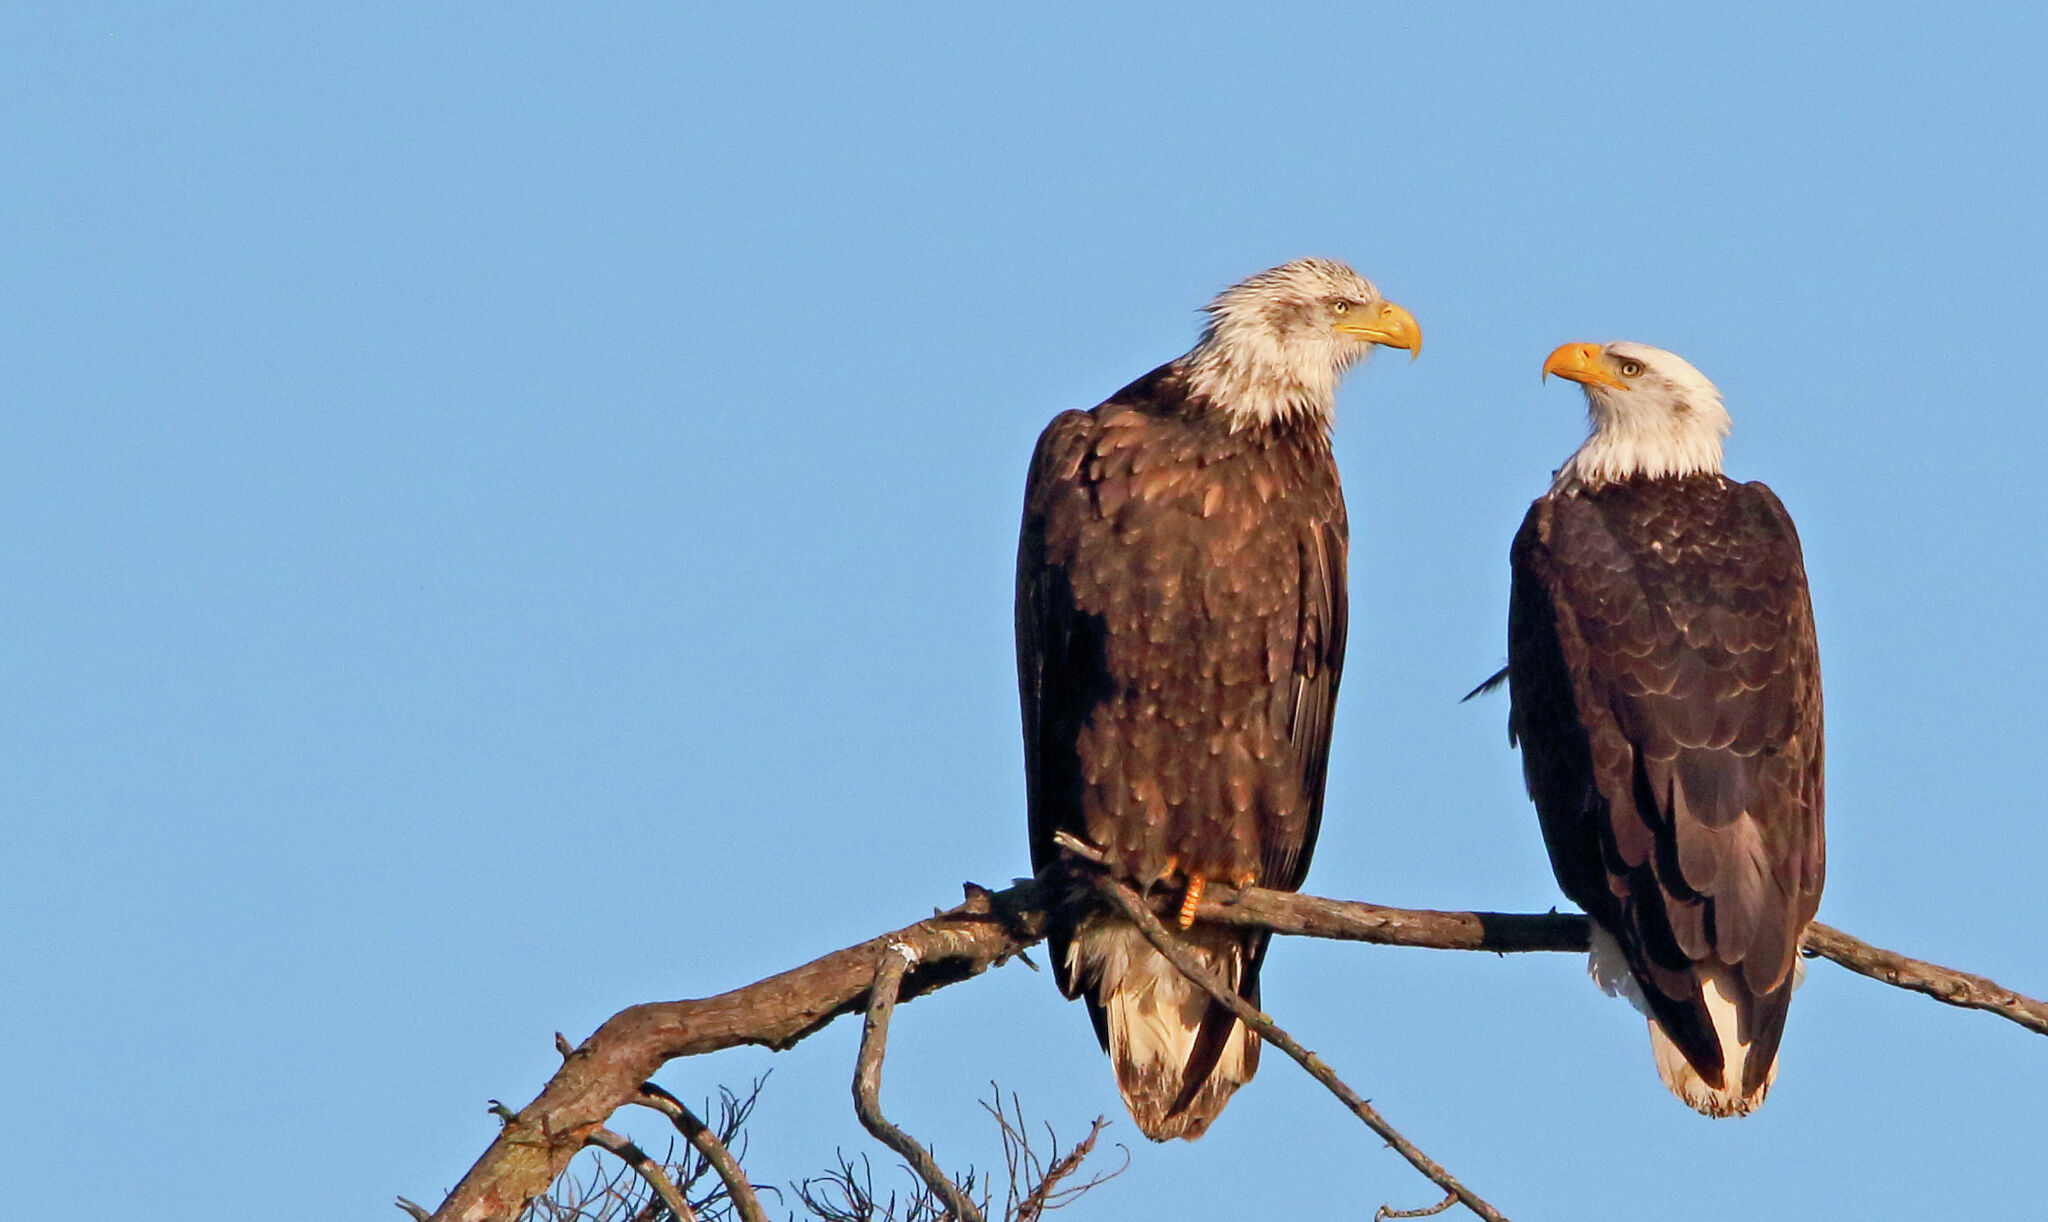 6 Great Places to See Bald Eagles in the San Francisco Bay Area